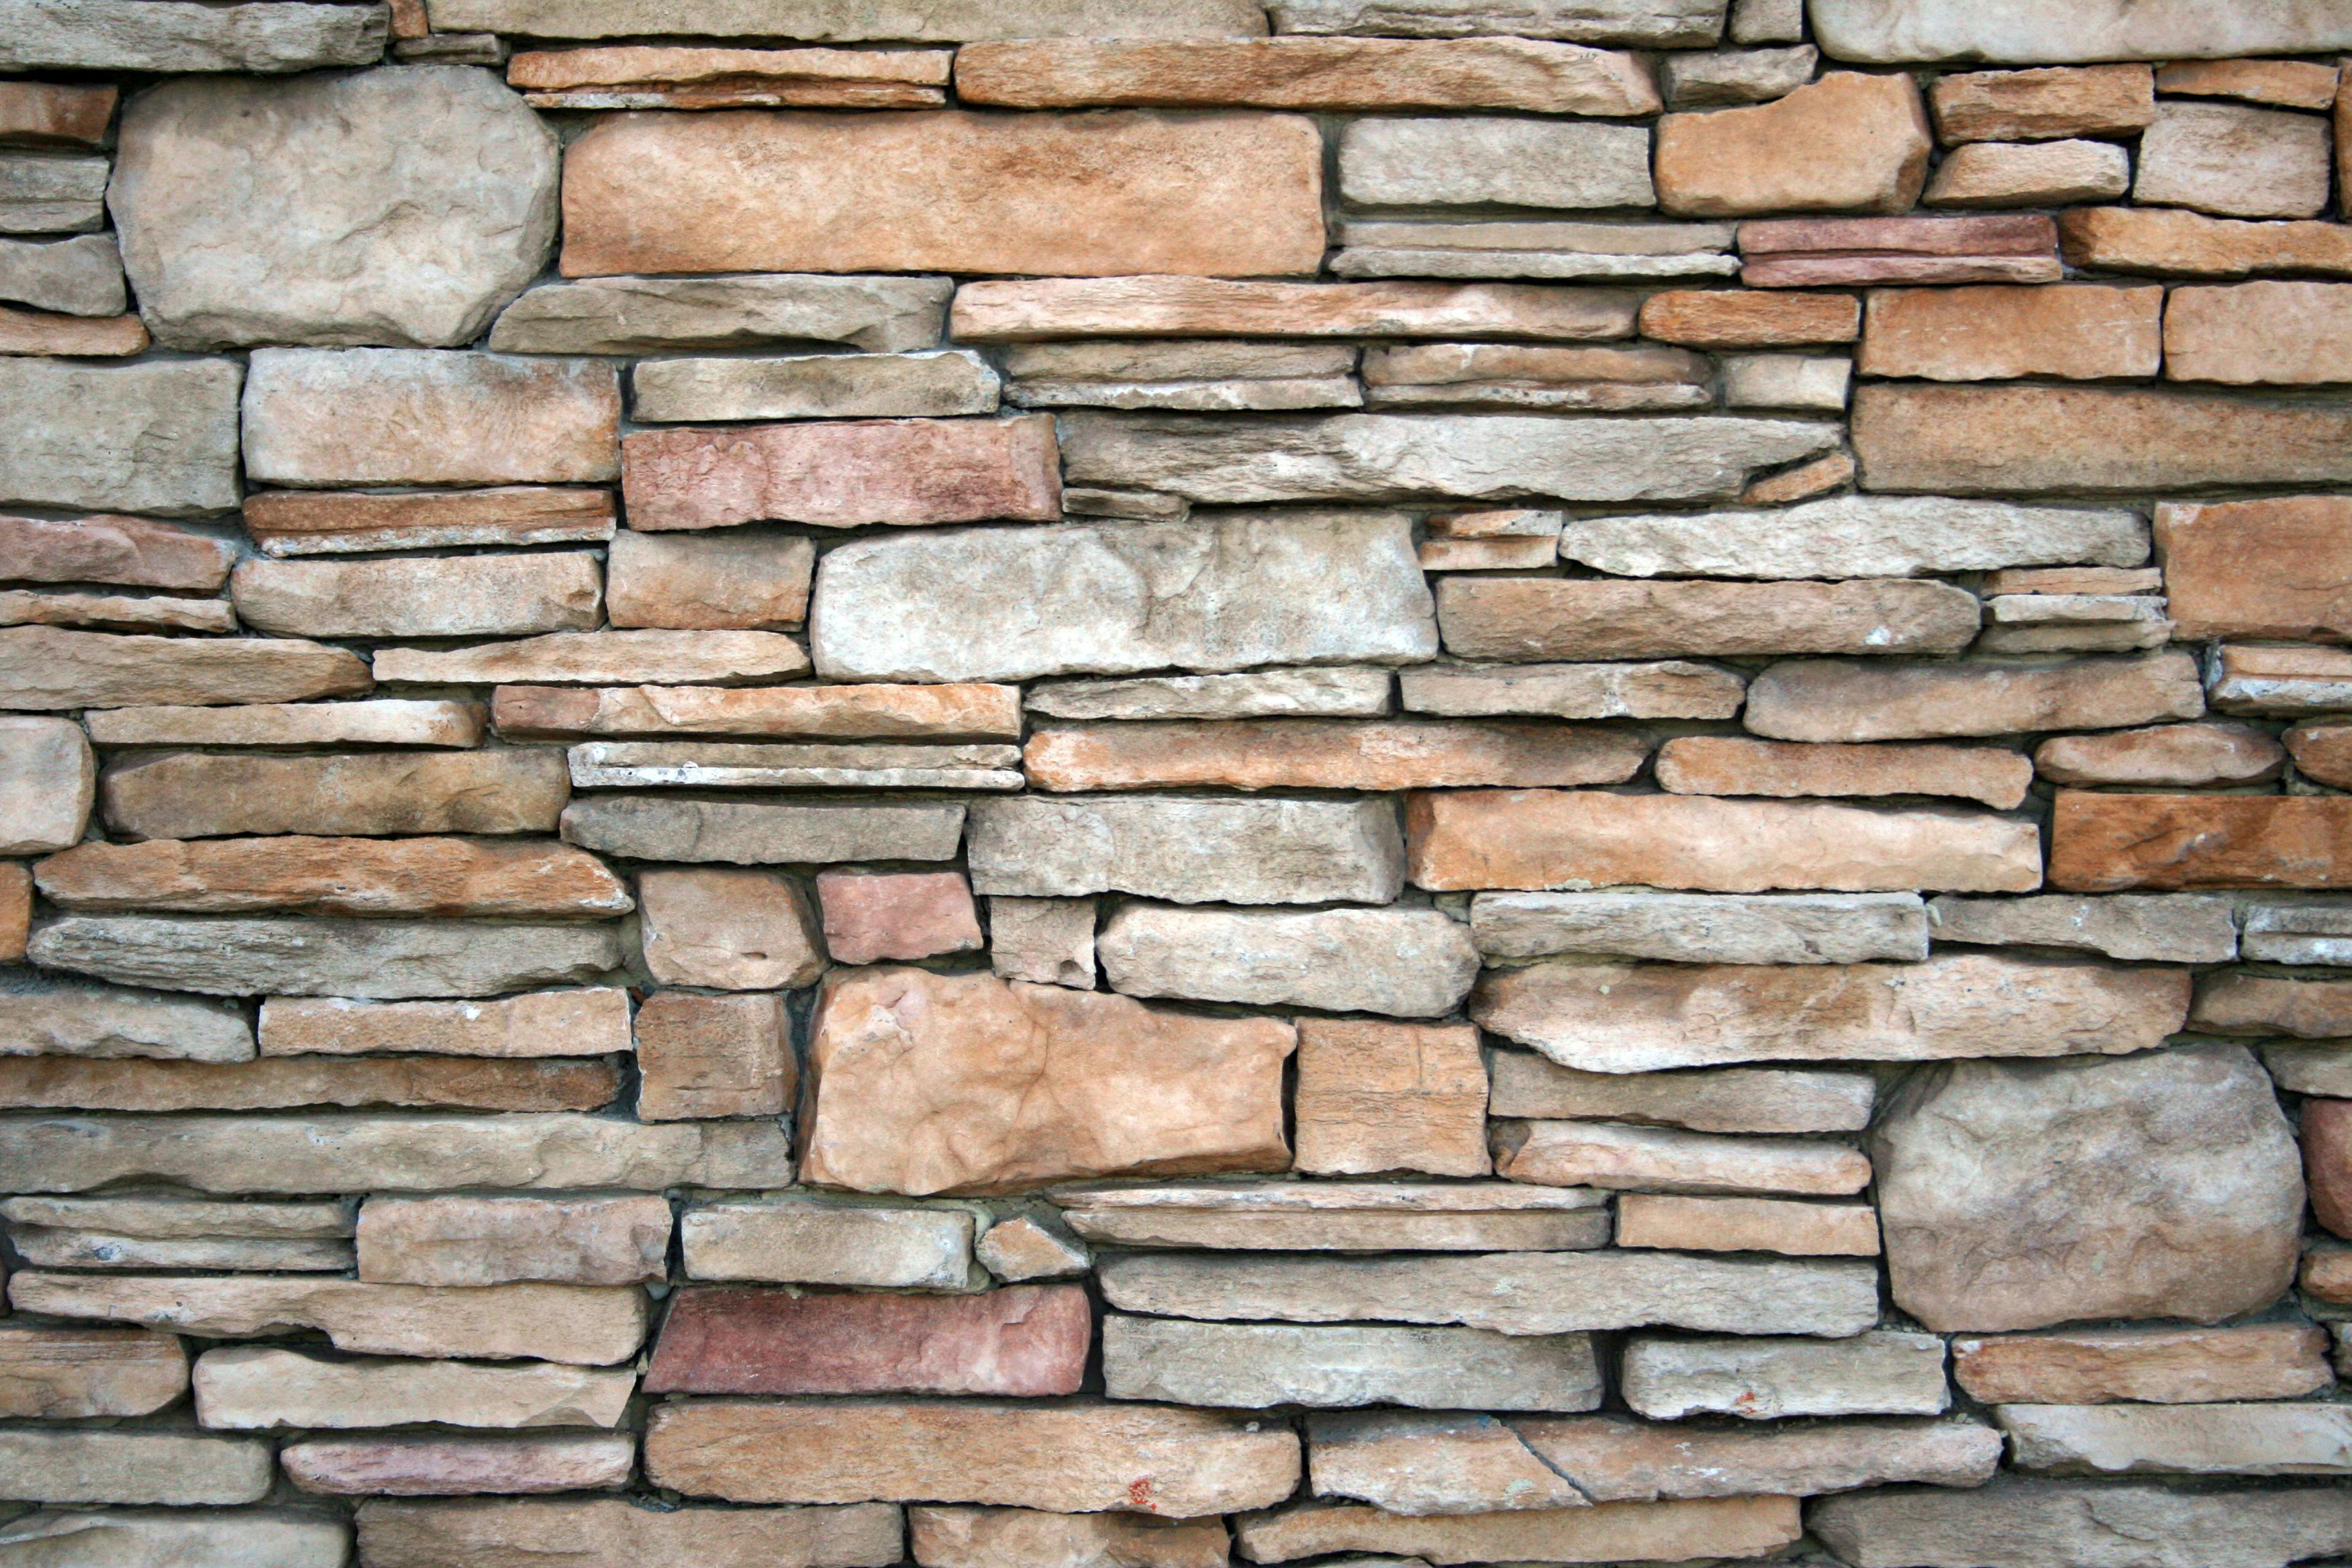 147,705 Country Stone Wall Royalty-Free Photos and Stock Images